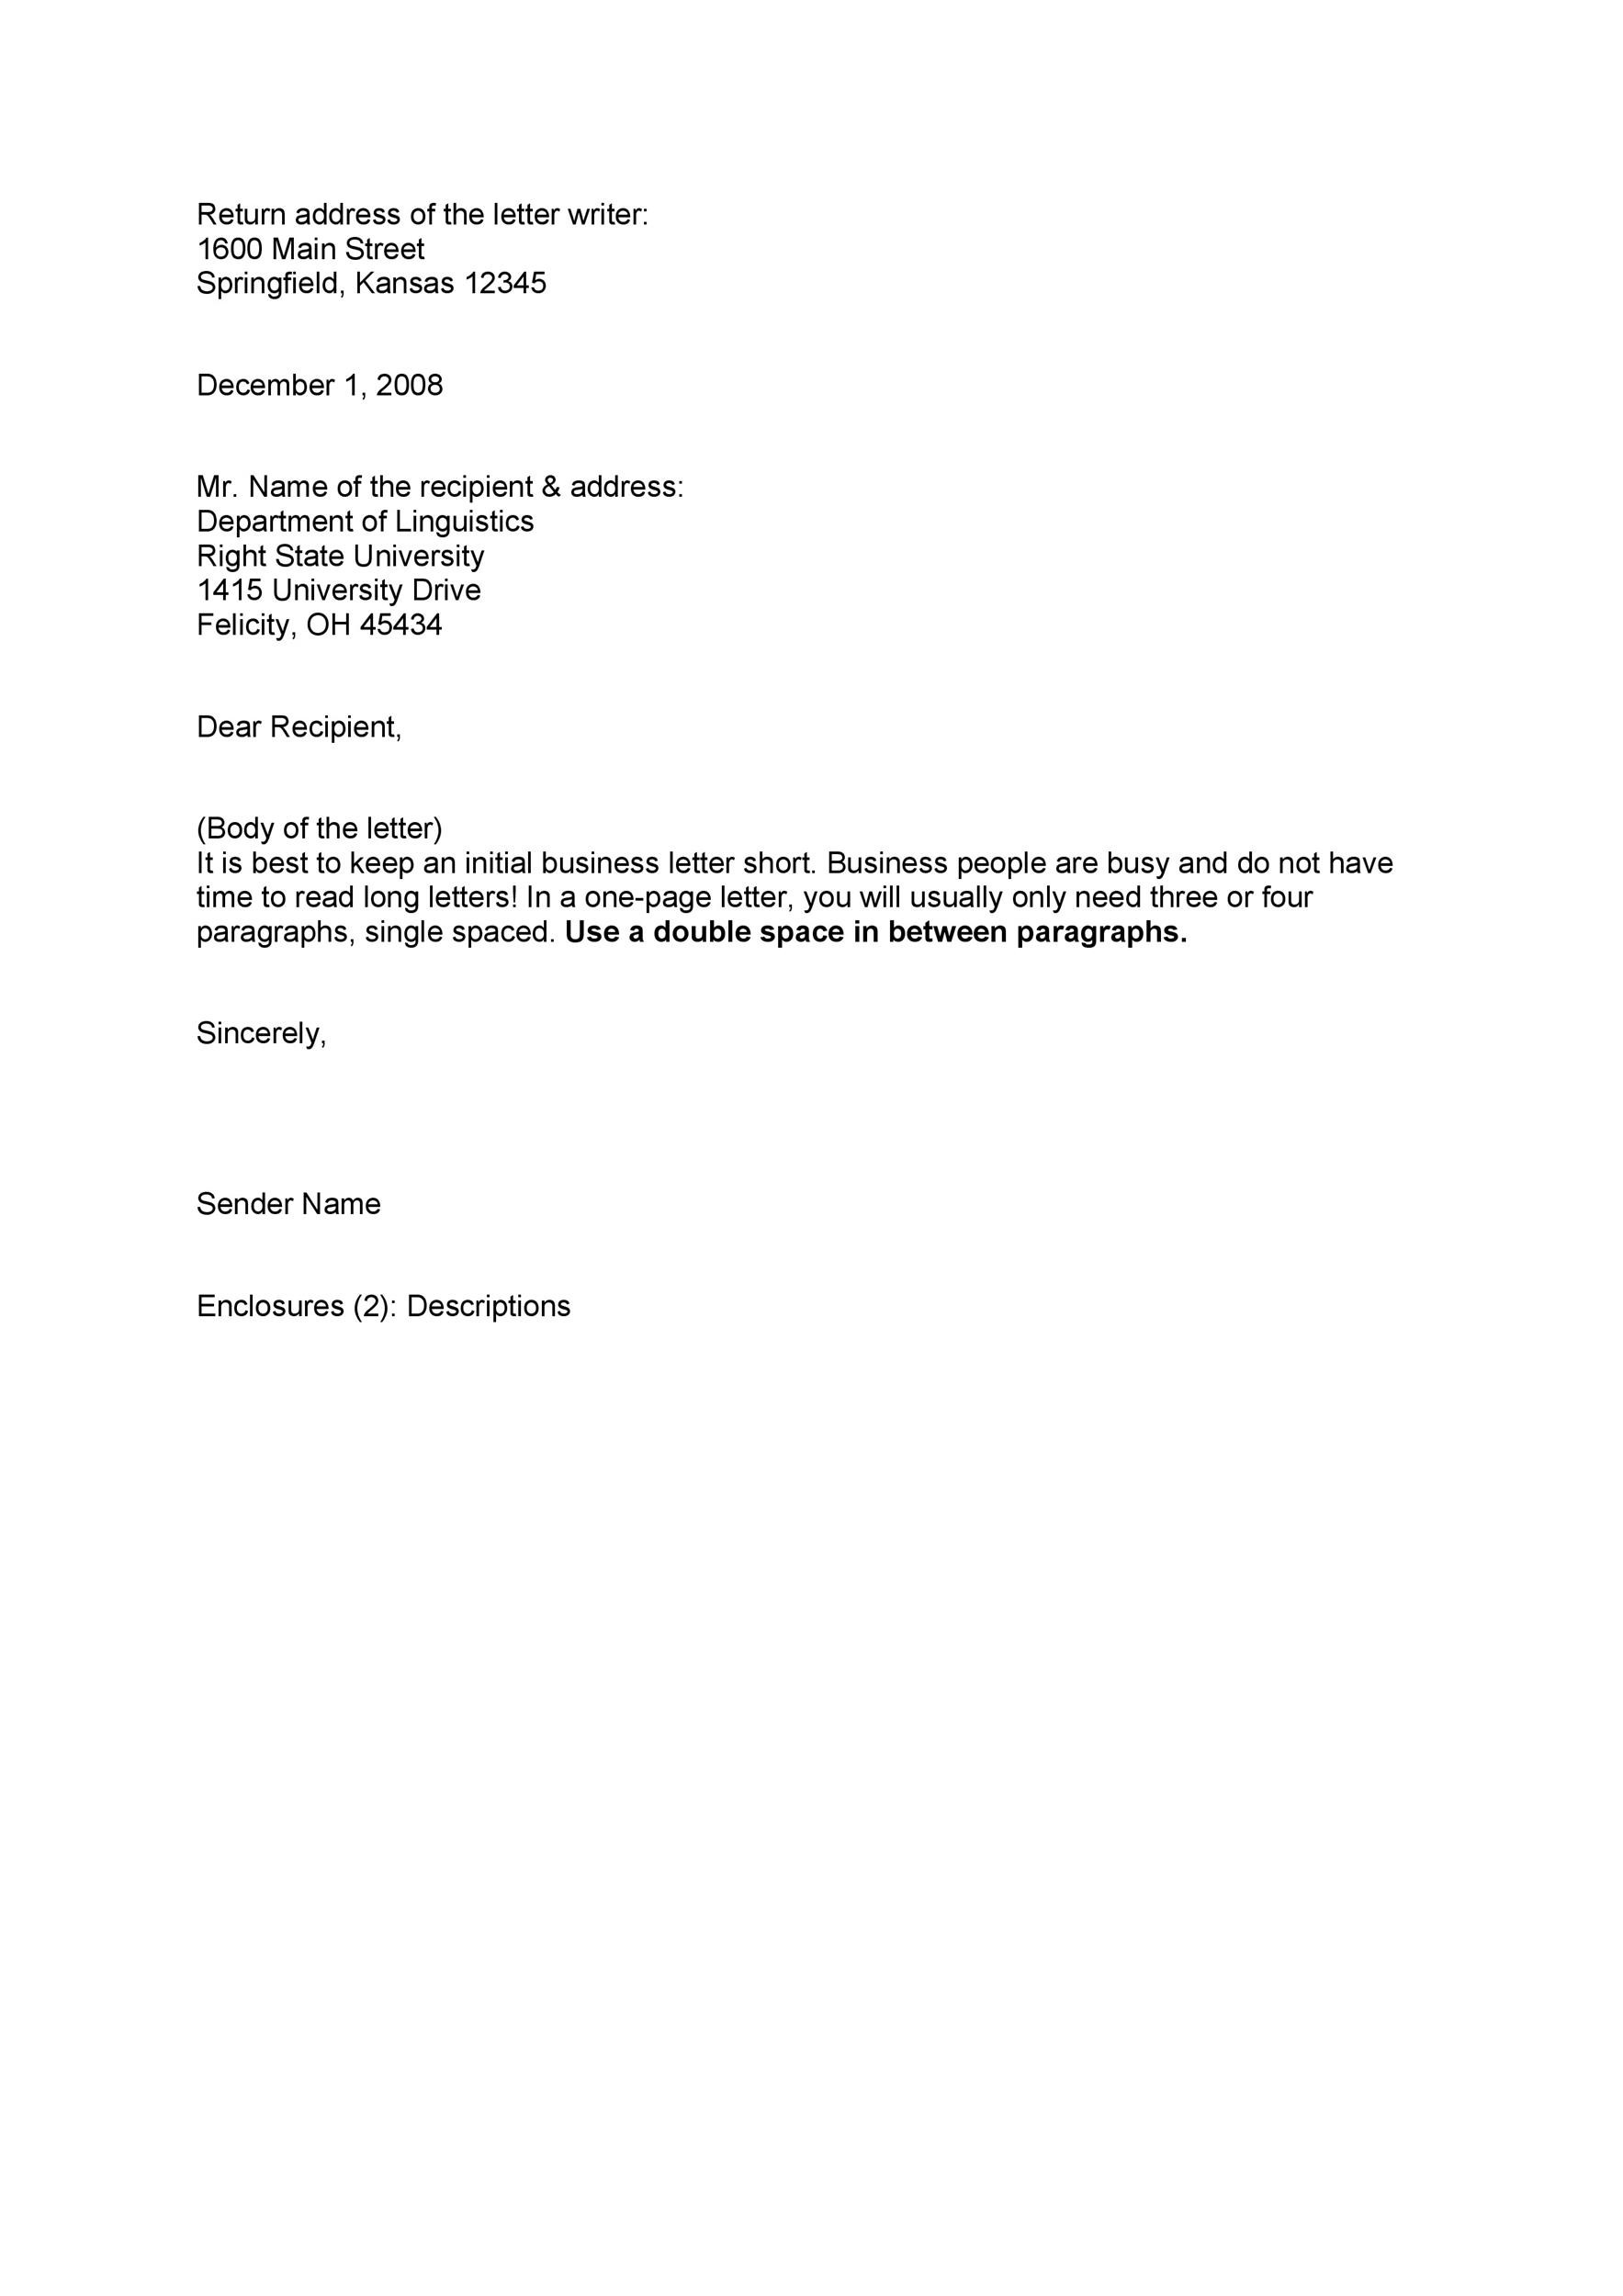 35 Formal / Business Letter Format Templates & Examples ᐅ ...